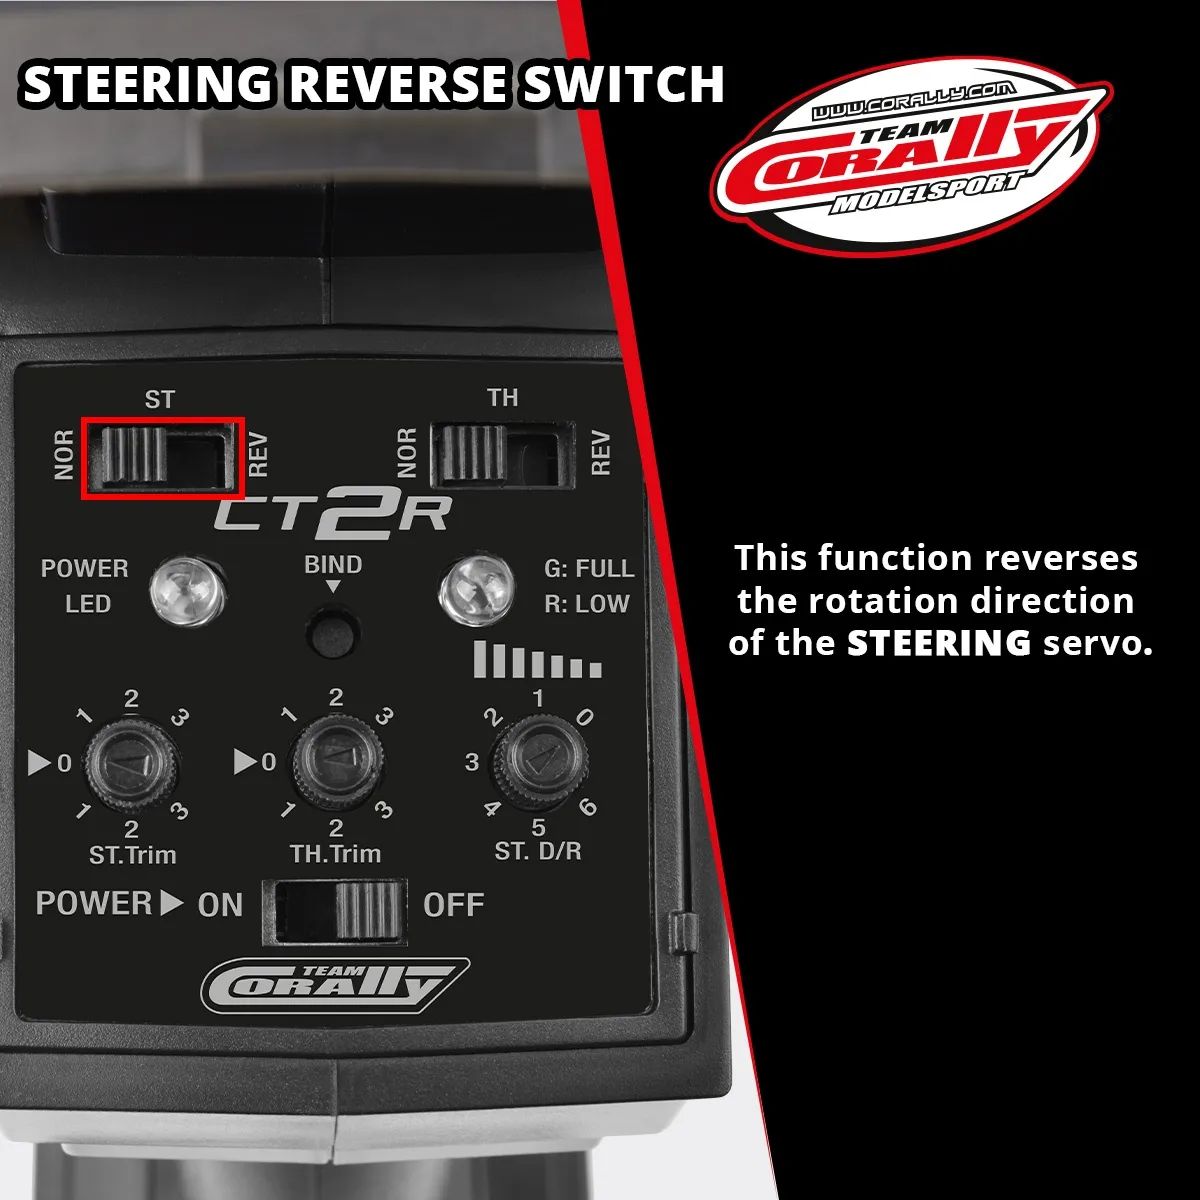 corally-ct2r-steering-reverse-switch.jpg